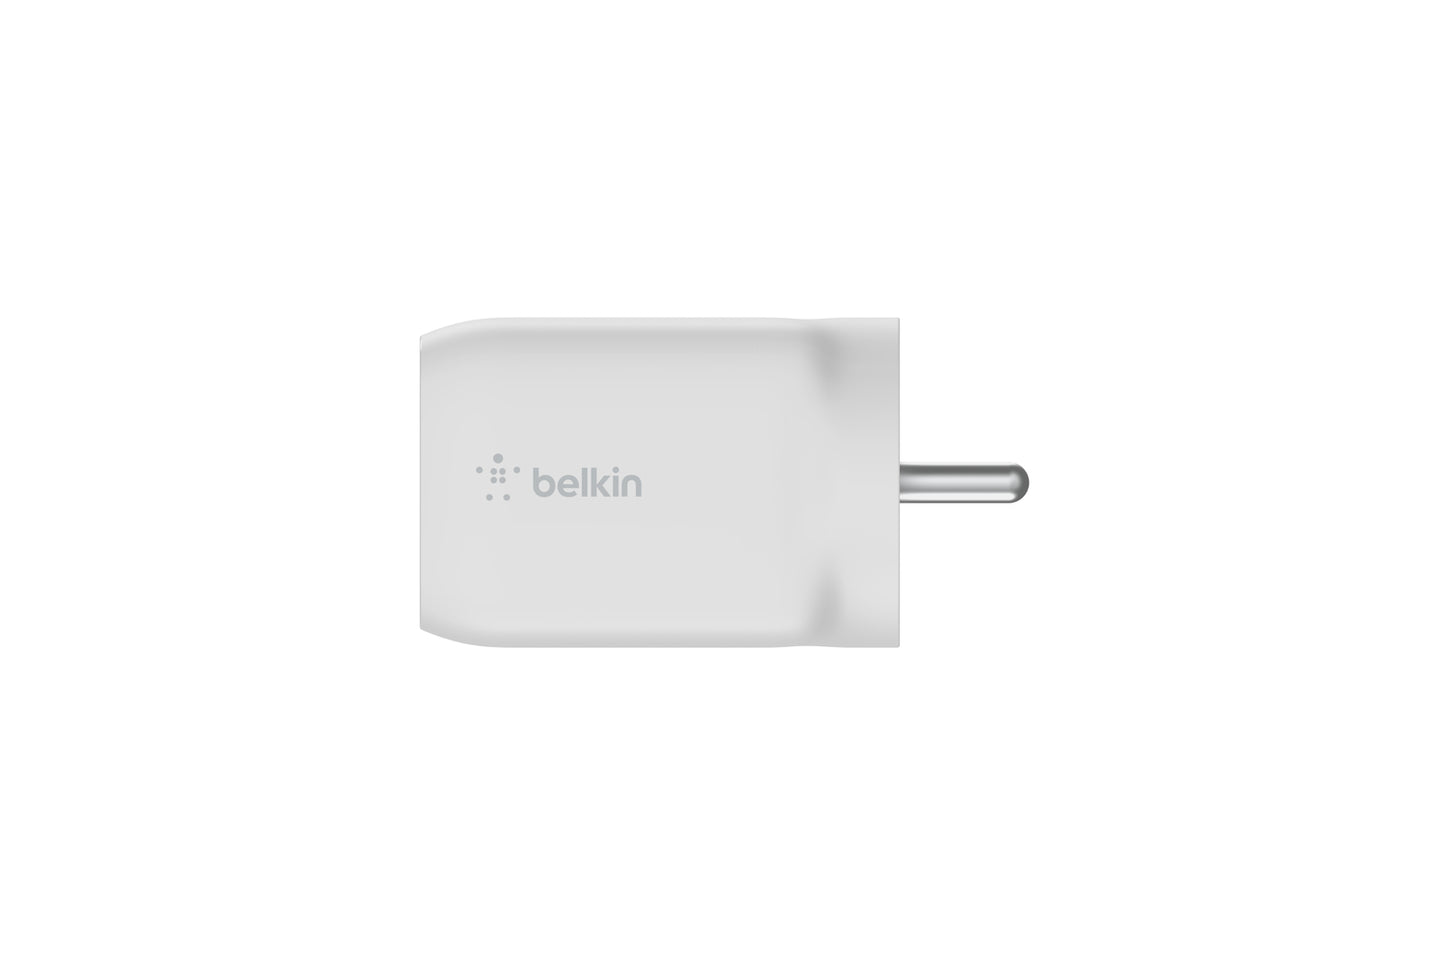 Belkin 65W GaN Dual USB C PD 3.0 Fast Charger with PPS Technology, Compact Size, USB-C, Type C Fast Charger for iPhone, MacBook Air, iPad Pro, Pixel, Galaxy, More Devices – White-Power Adapters & Chargers-computerspace